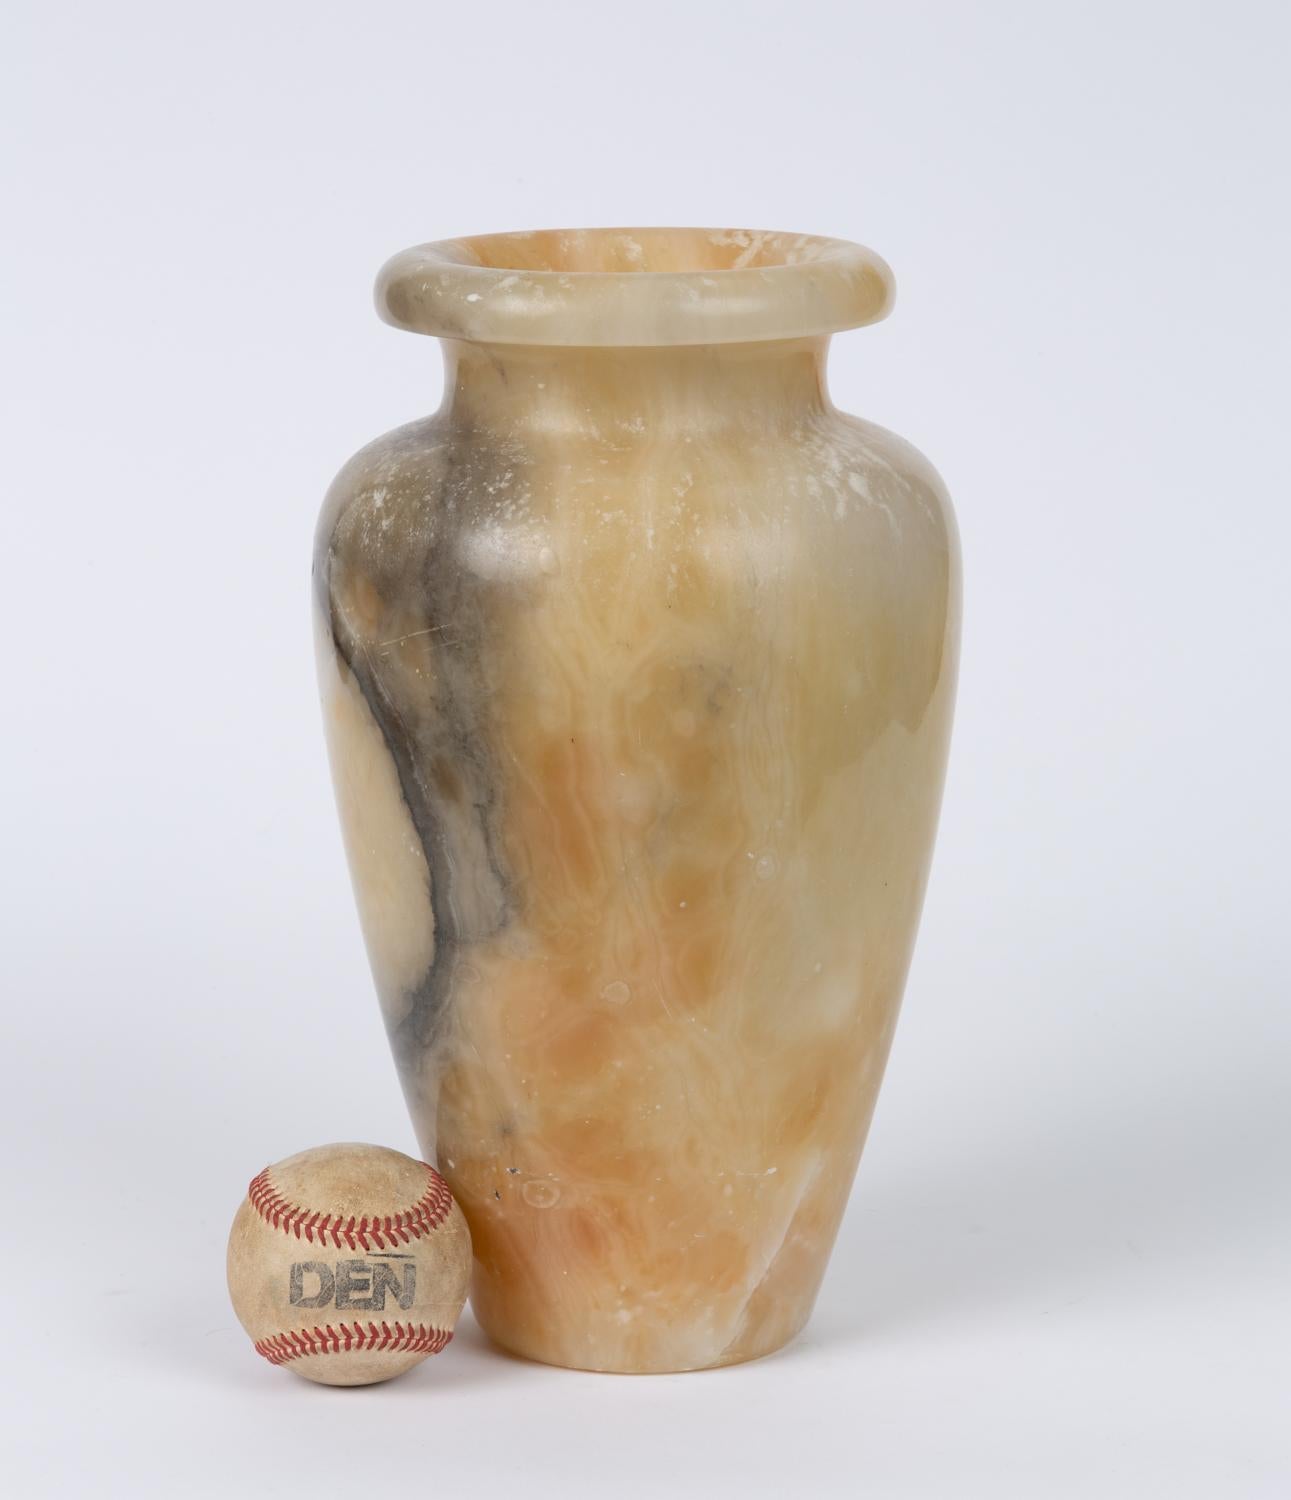 Vintage hand carved alabaster vase. It features an ovoid body gently tapering to a flat base, with broad shoulders and a disk rim. The short neck is concave and the interior well is hollowed.

Condition: Excellent original condition with no chips,